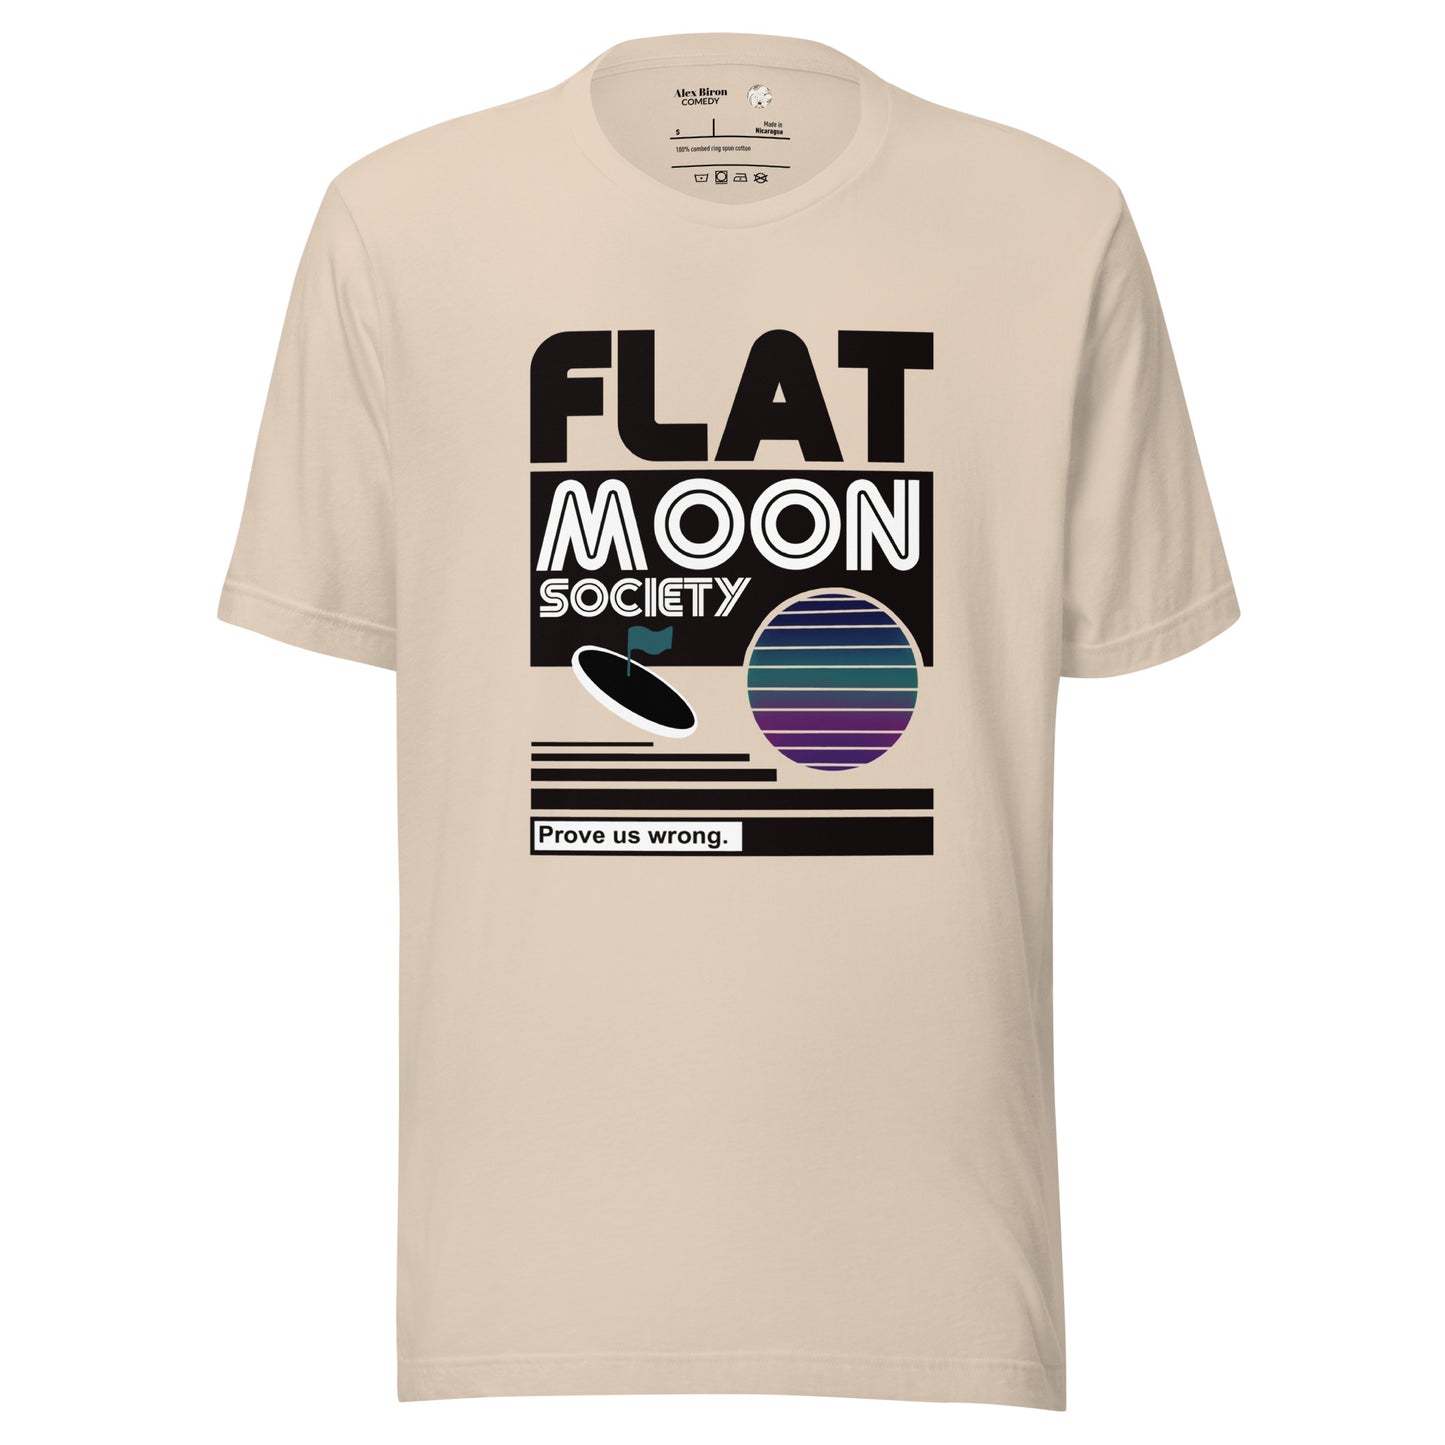 Flat moon society Unisex t-shirt - INCLUDES SHIPPING